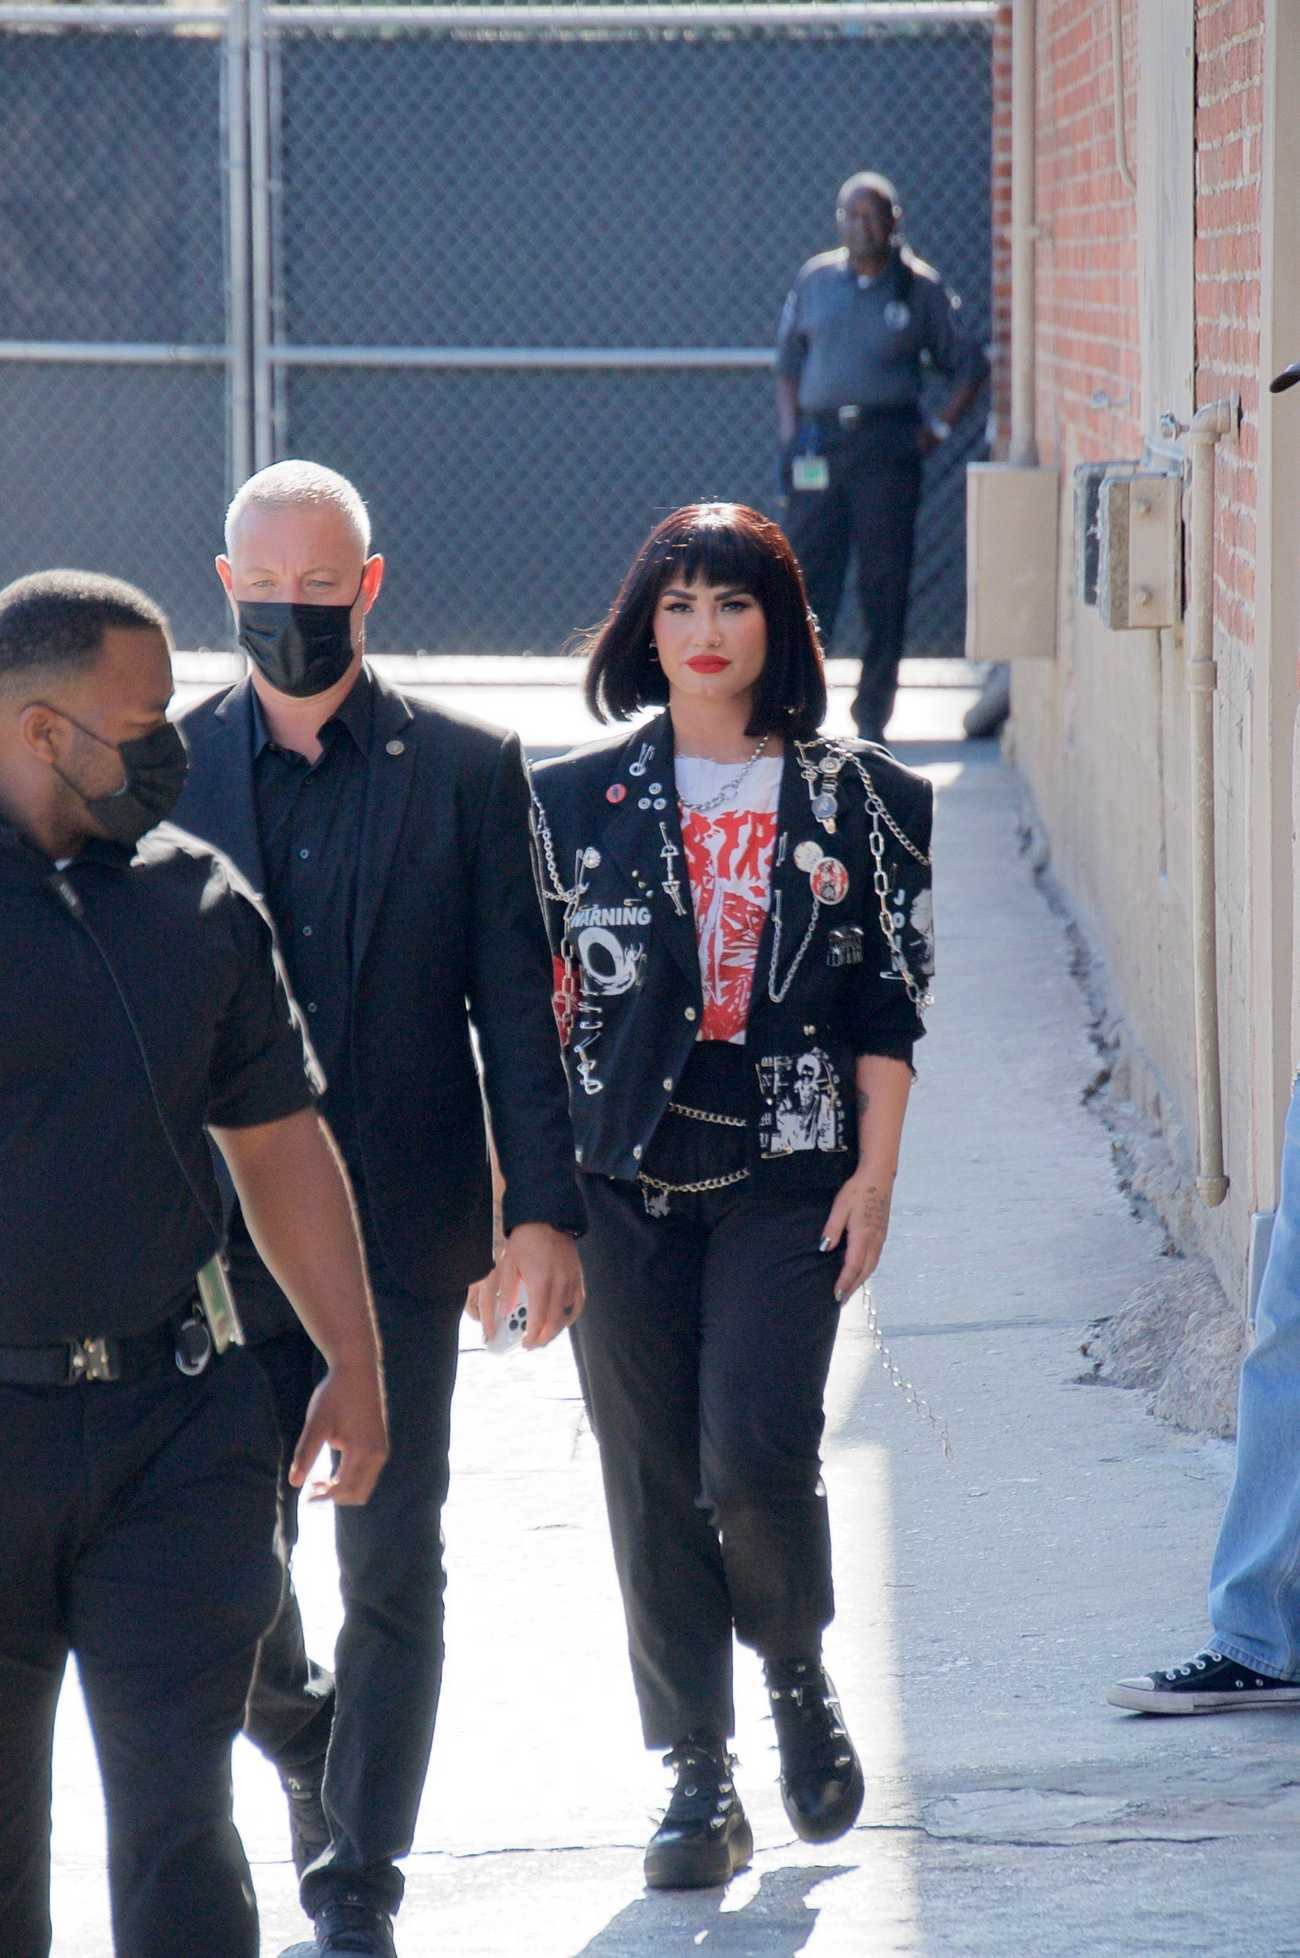 Demi_Lovato_Attends_Tapping_For_Jimmy_Kimmel_Live_In_Hollywood_-_July_14_202207.jpg